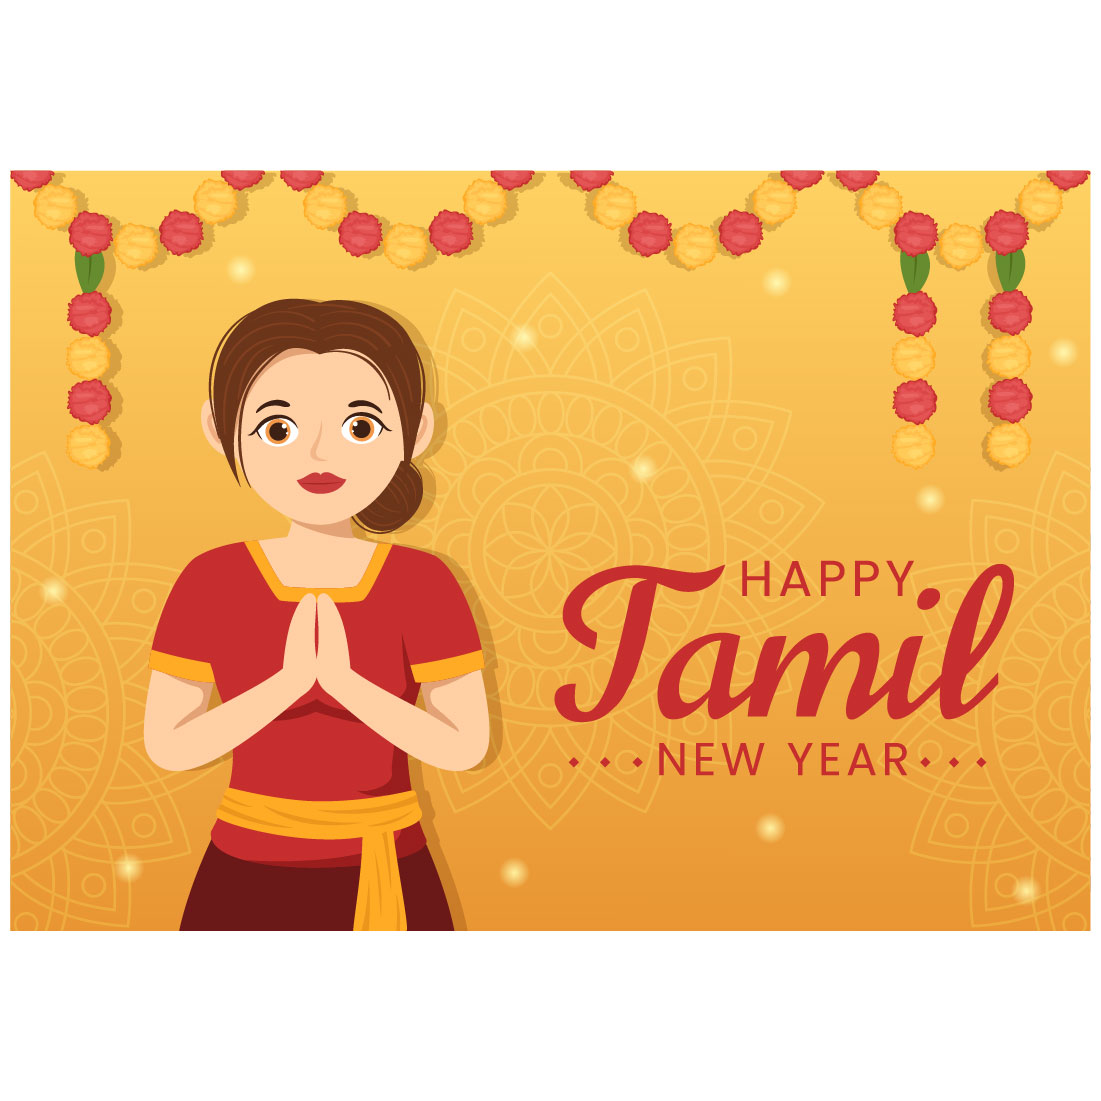 12 Happy Tamil New Year Illustration cover image.